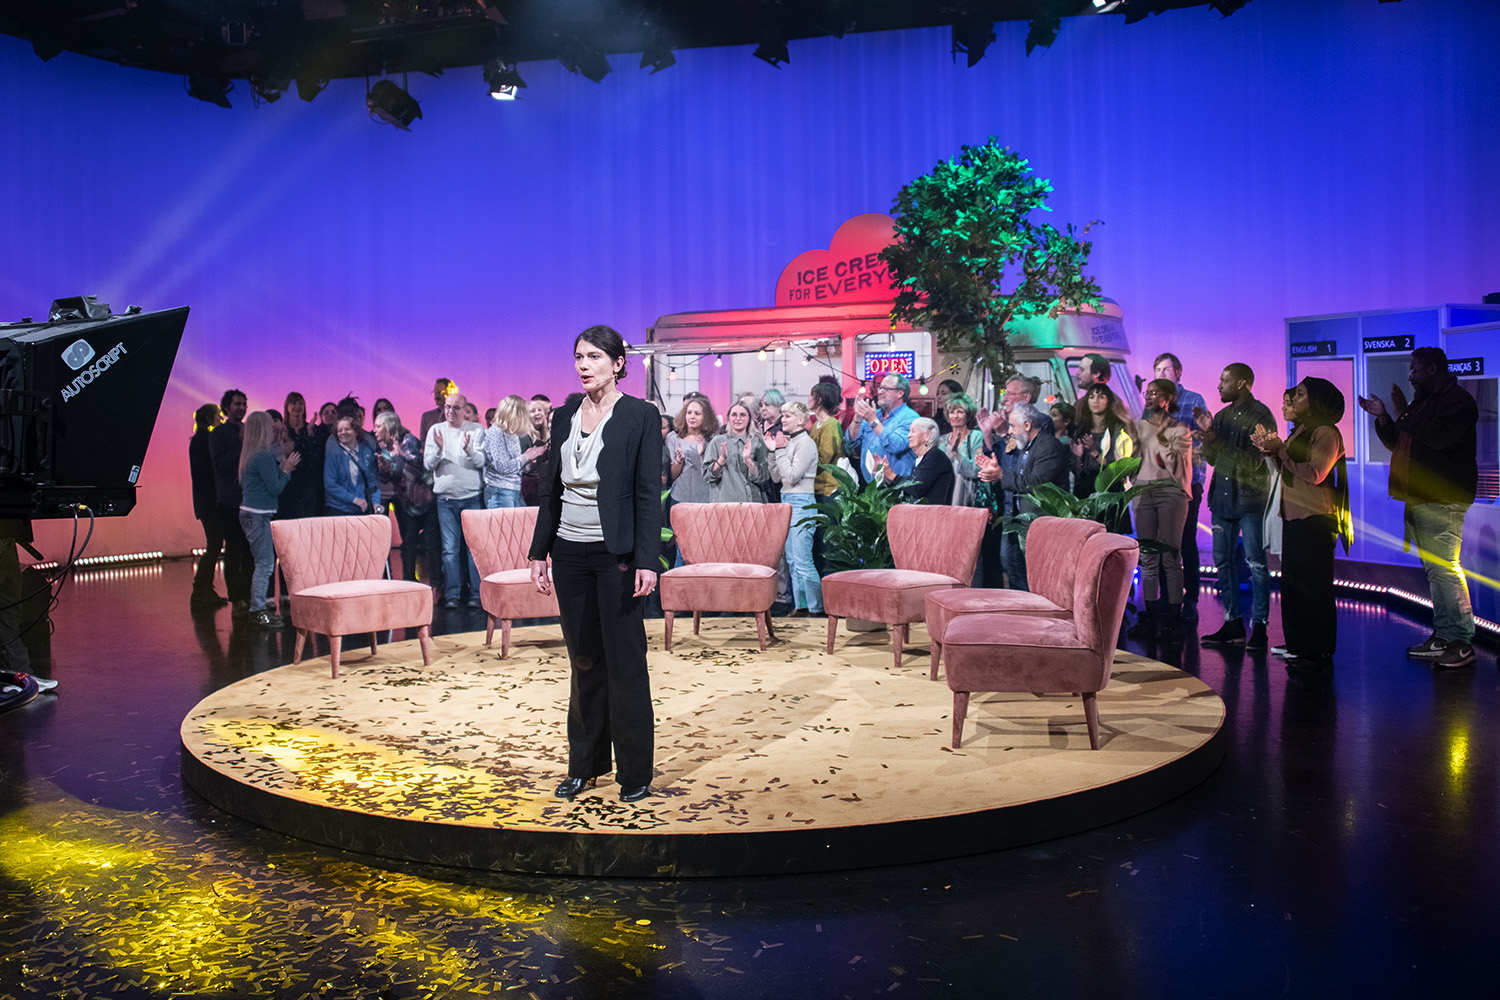 Audience in a TV-studio with a woman in the front.